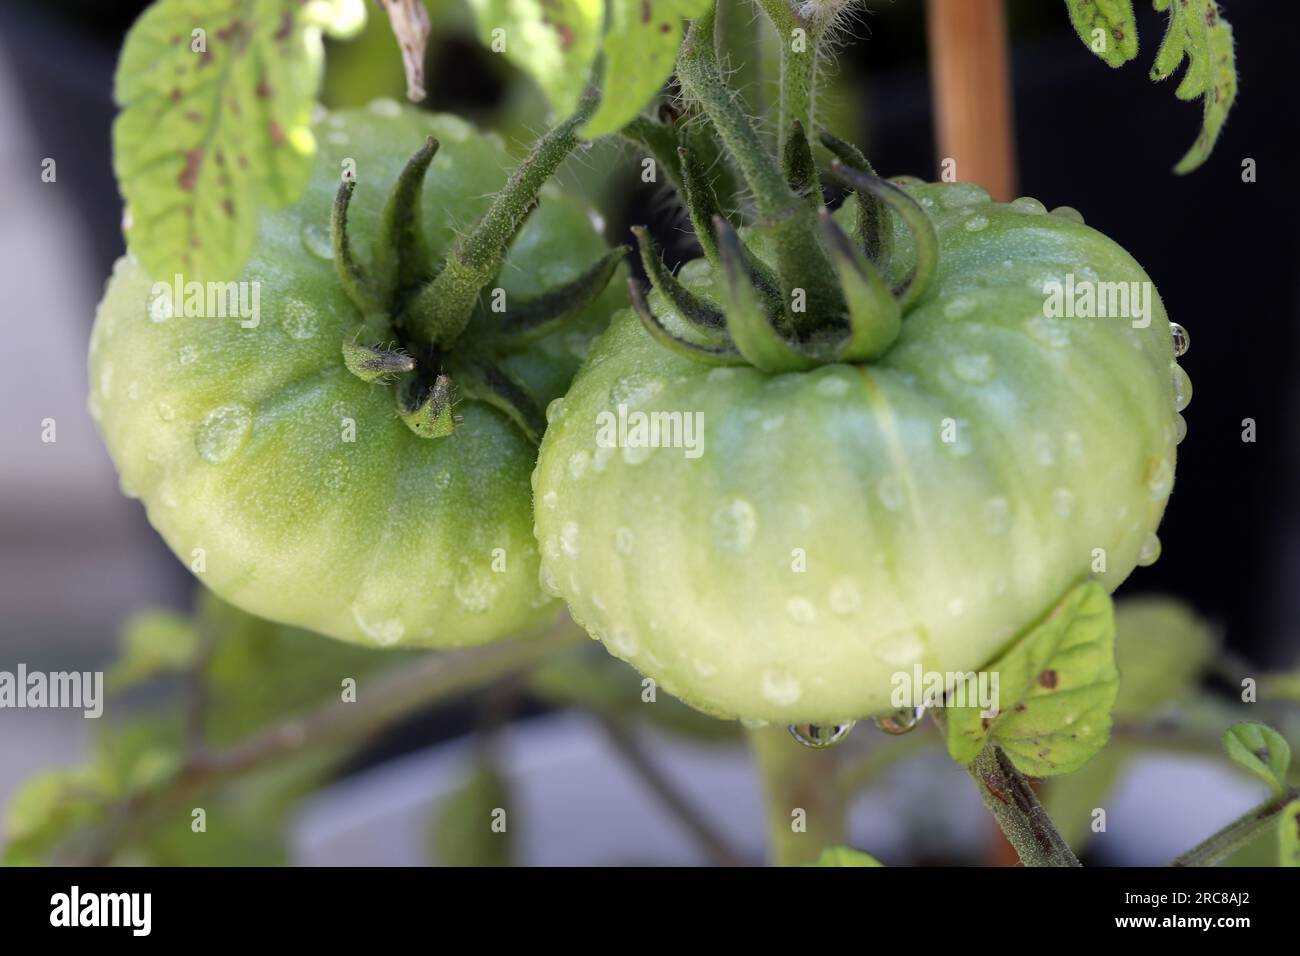 water drops on green tomato Stock Photo